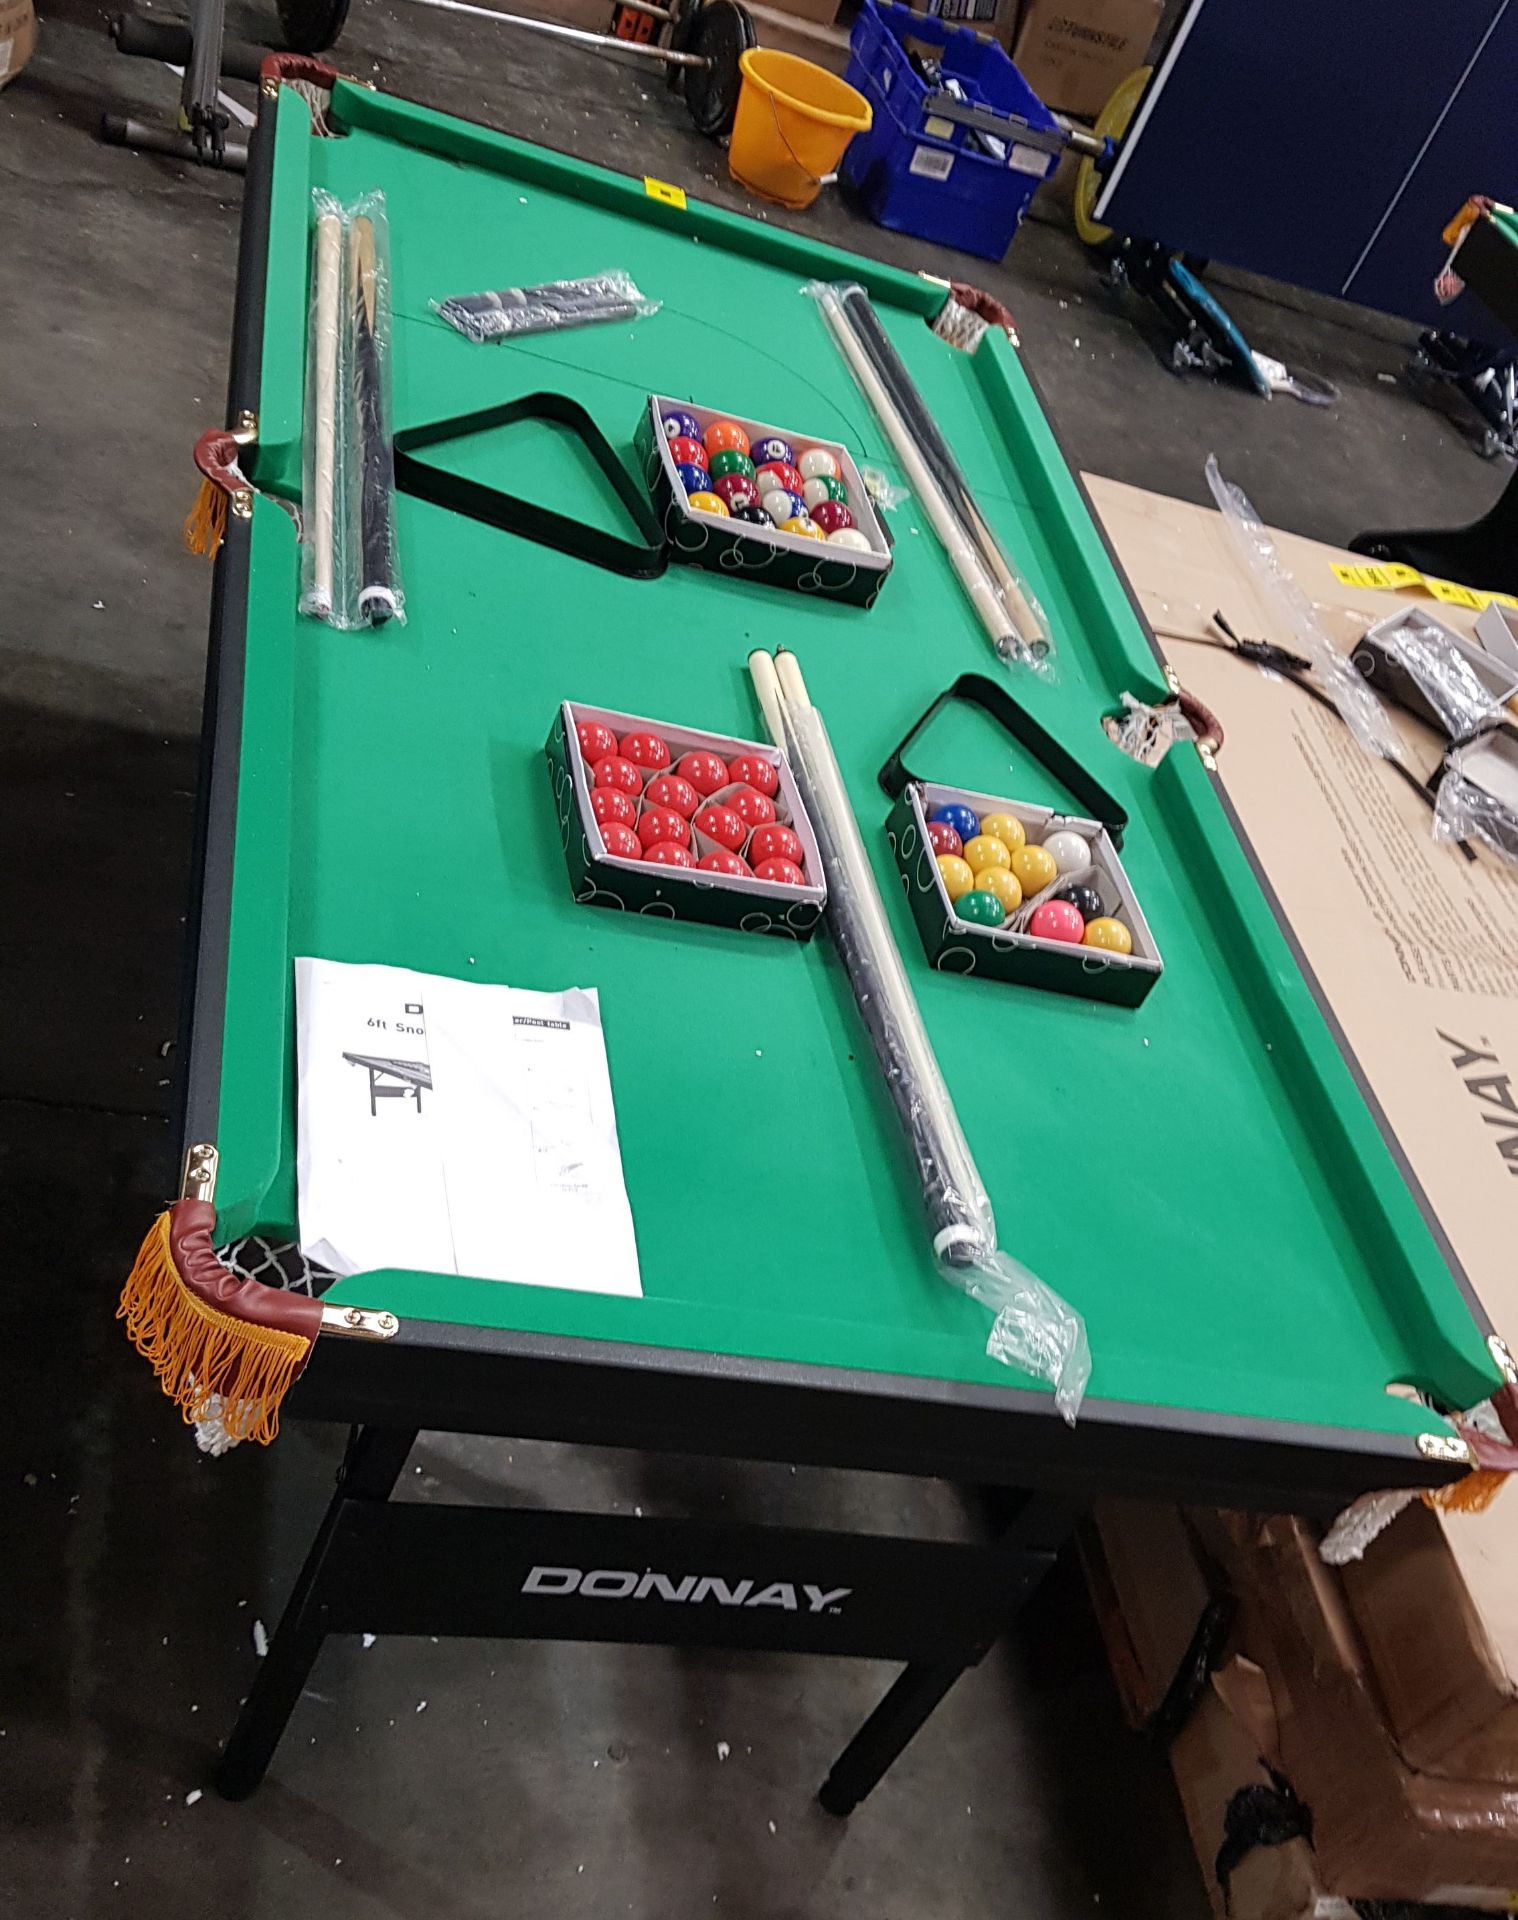 1 X BUILT DONNAY FOLDABLE 6 FT SNOOKER TABLE - INCLUDES BALLS / QUES / CHALK AND TRIANGLE ( PLEASE